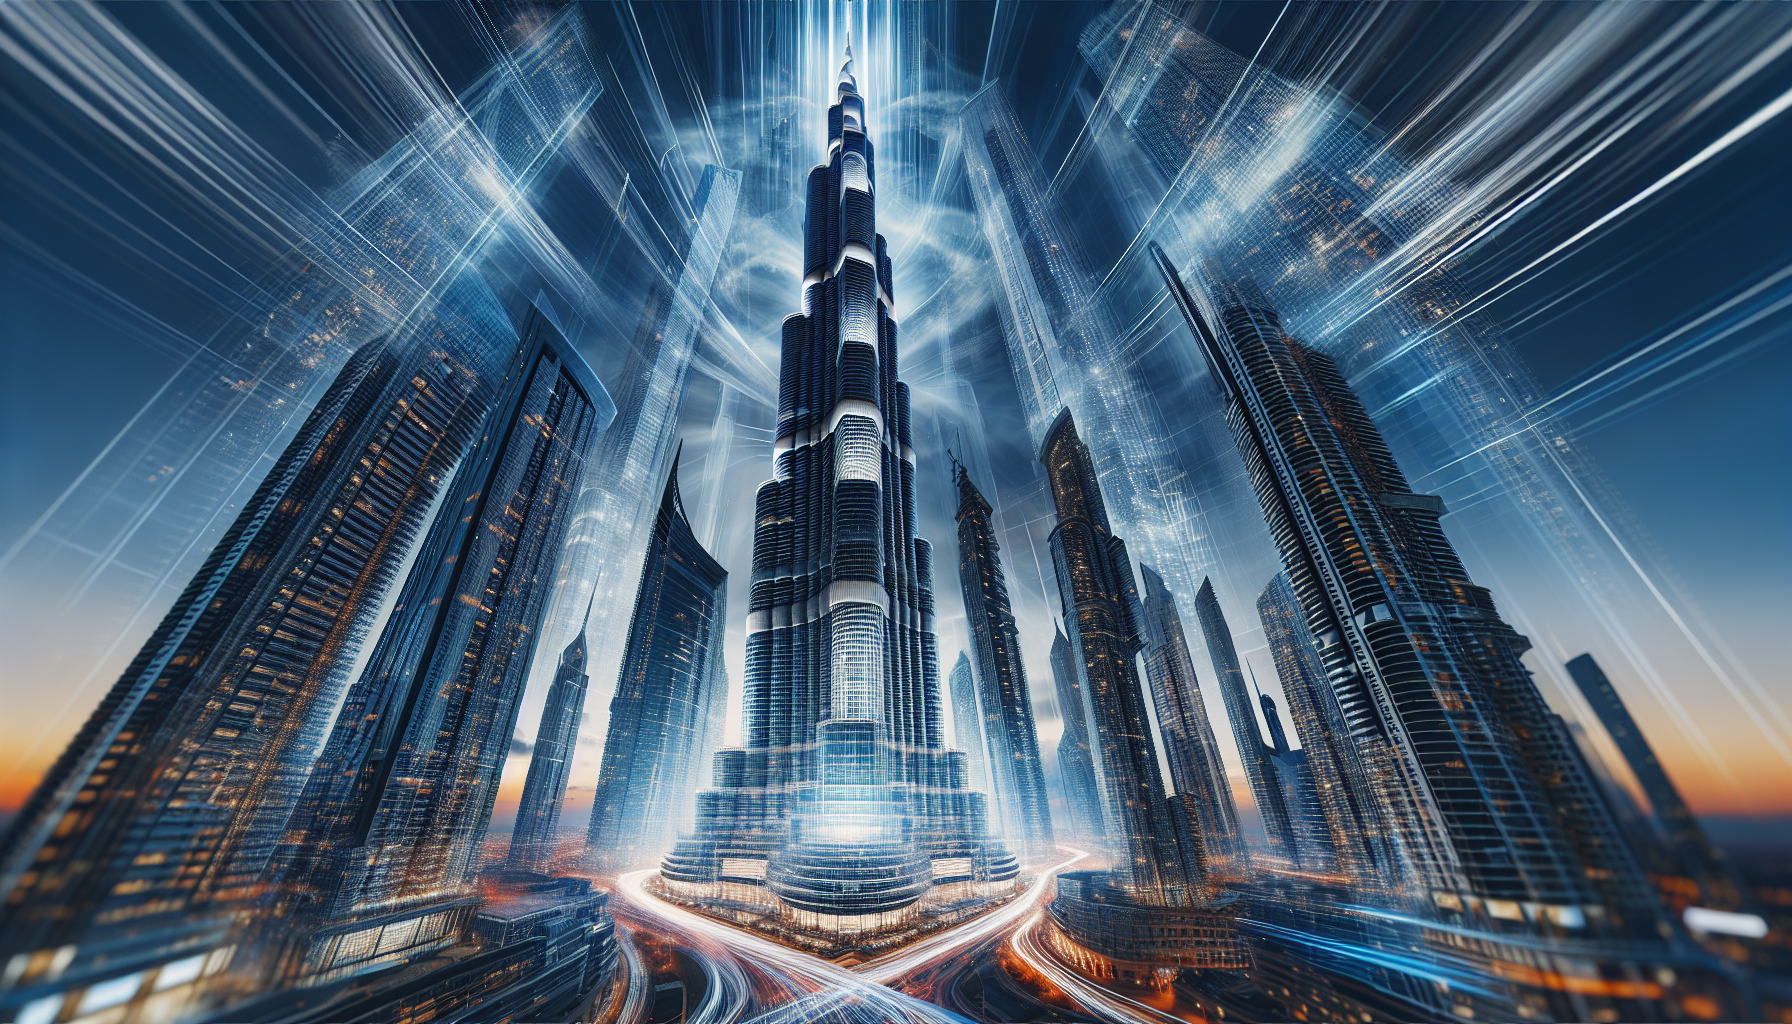 What Is The Tallest Building In The World 2023?